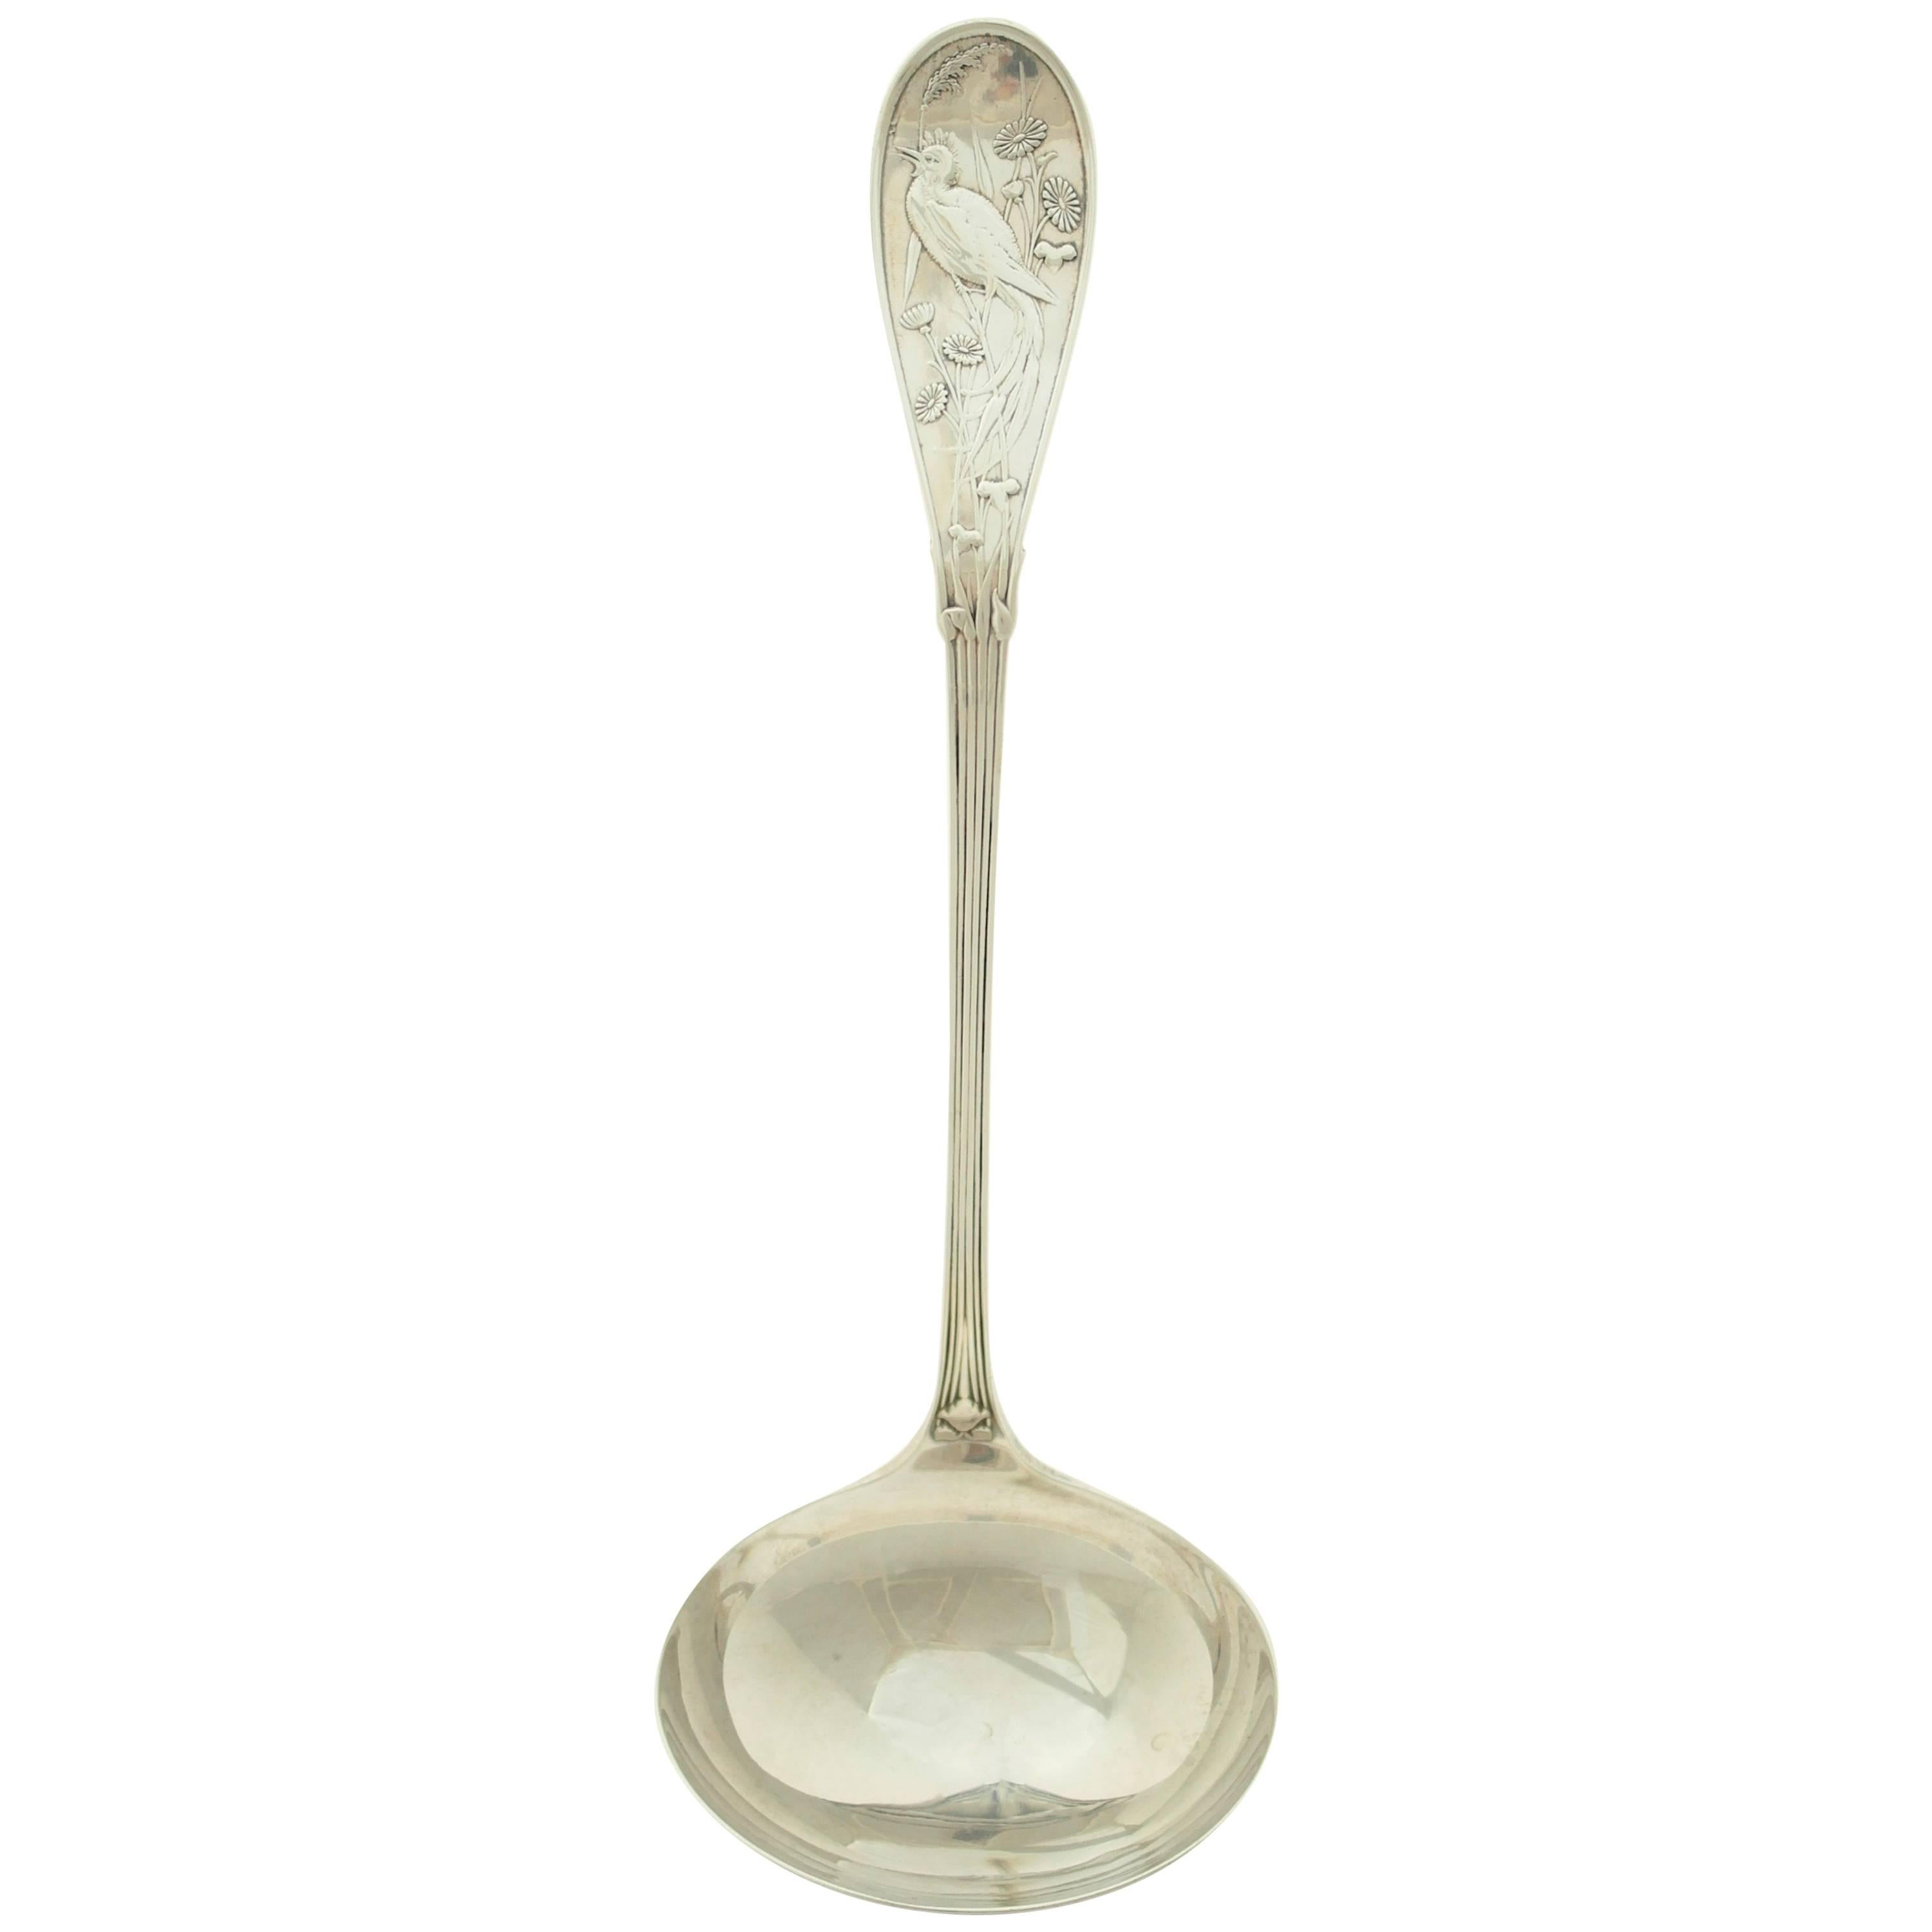 Tiffany & Company Japanese Pattern Sterling Silver Ladle For Sale